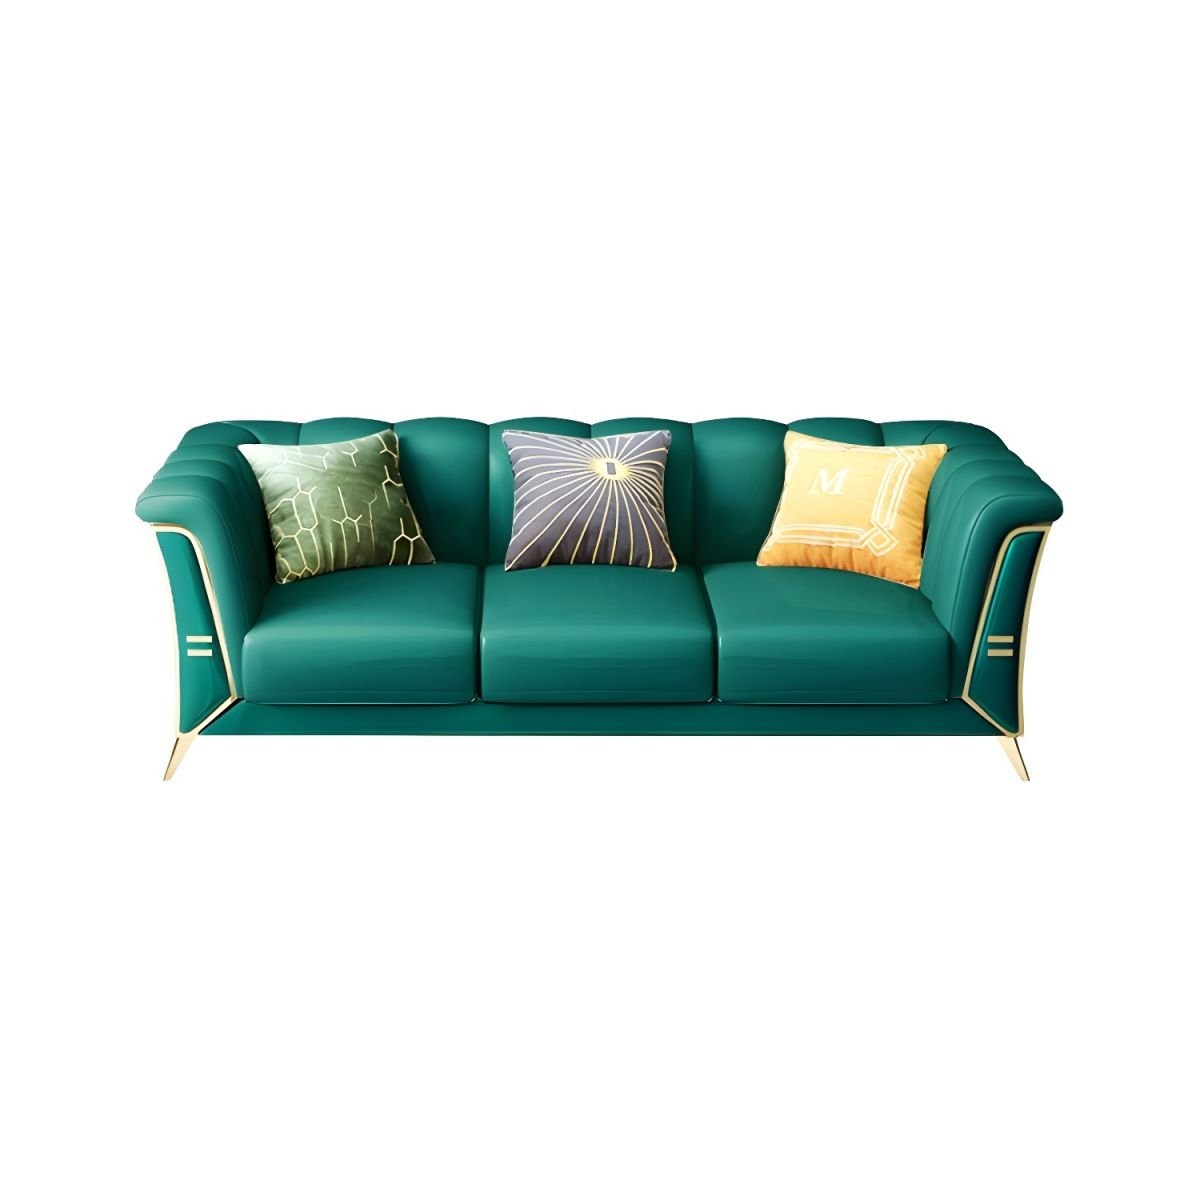 Glam Style Nappa Sectional Sofa with Brass Legs and Channel Back Design - 87"L x 36"W x 31"H Nappa Horizontal